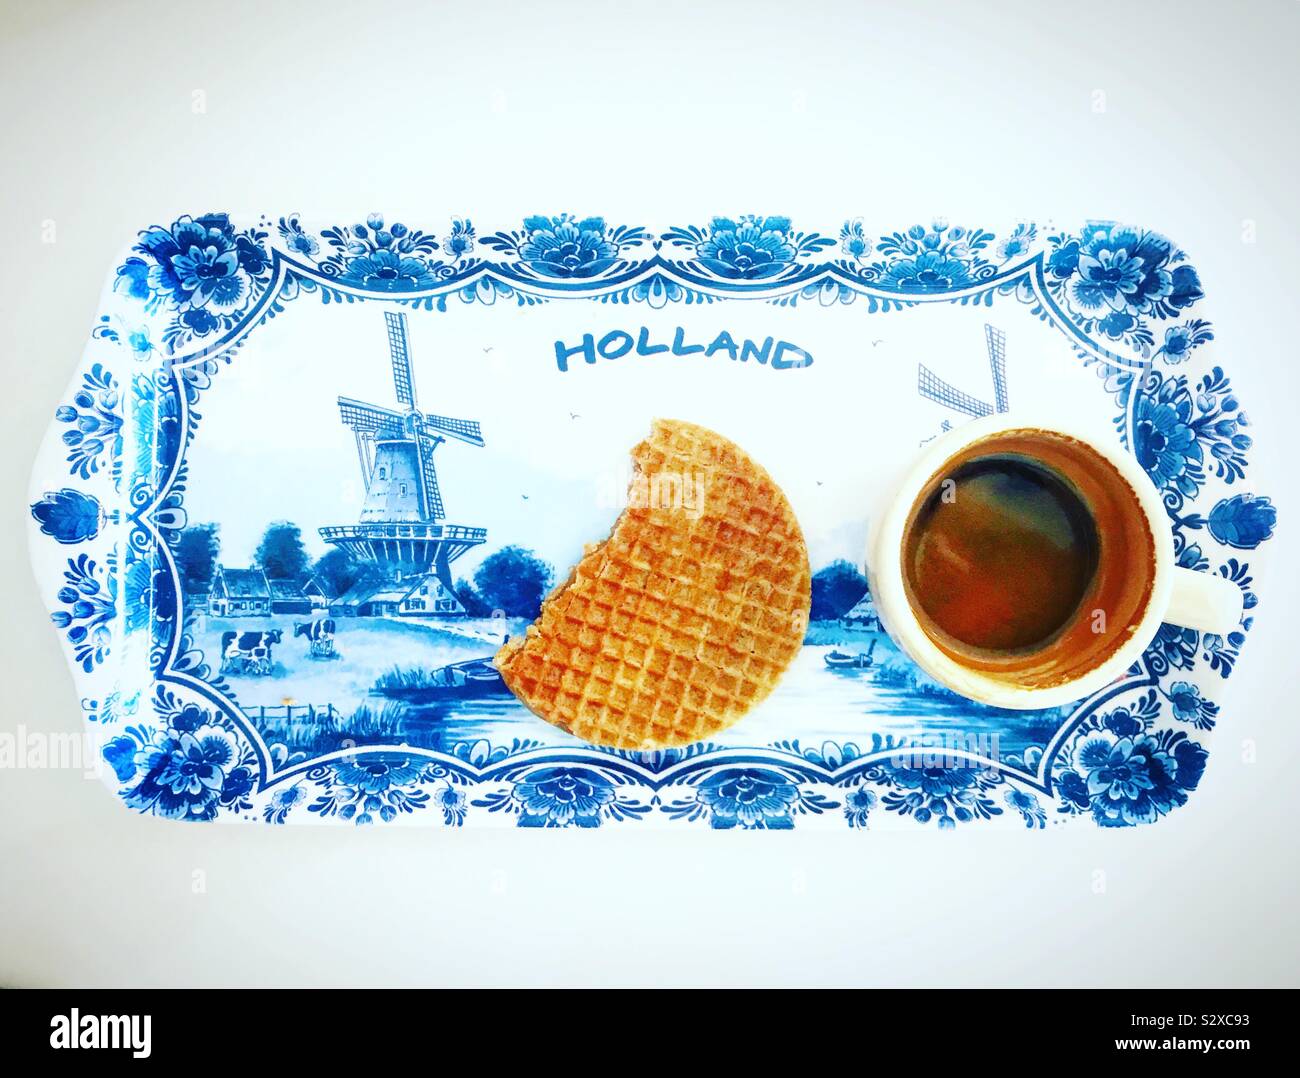 A cup of coffee and a waffle in a folk art tray in Holland Waffles restaurant in Mexico City, Mexico Stock Photo